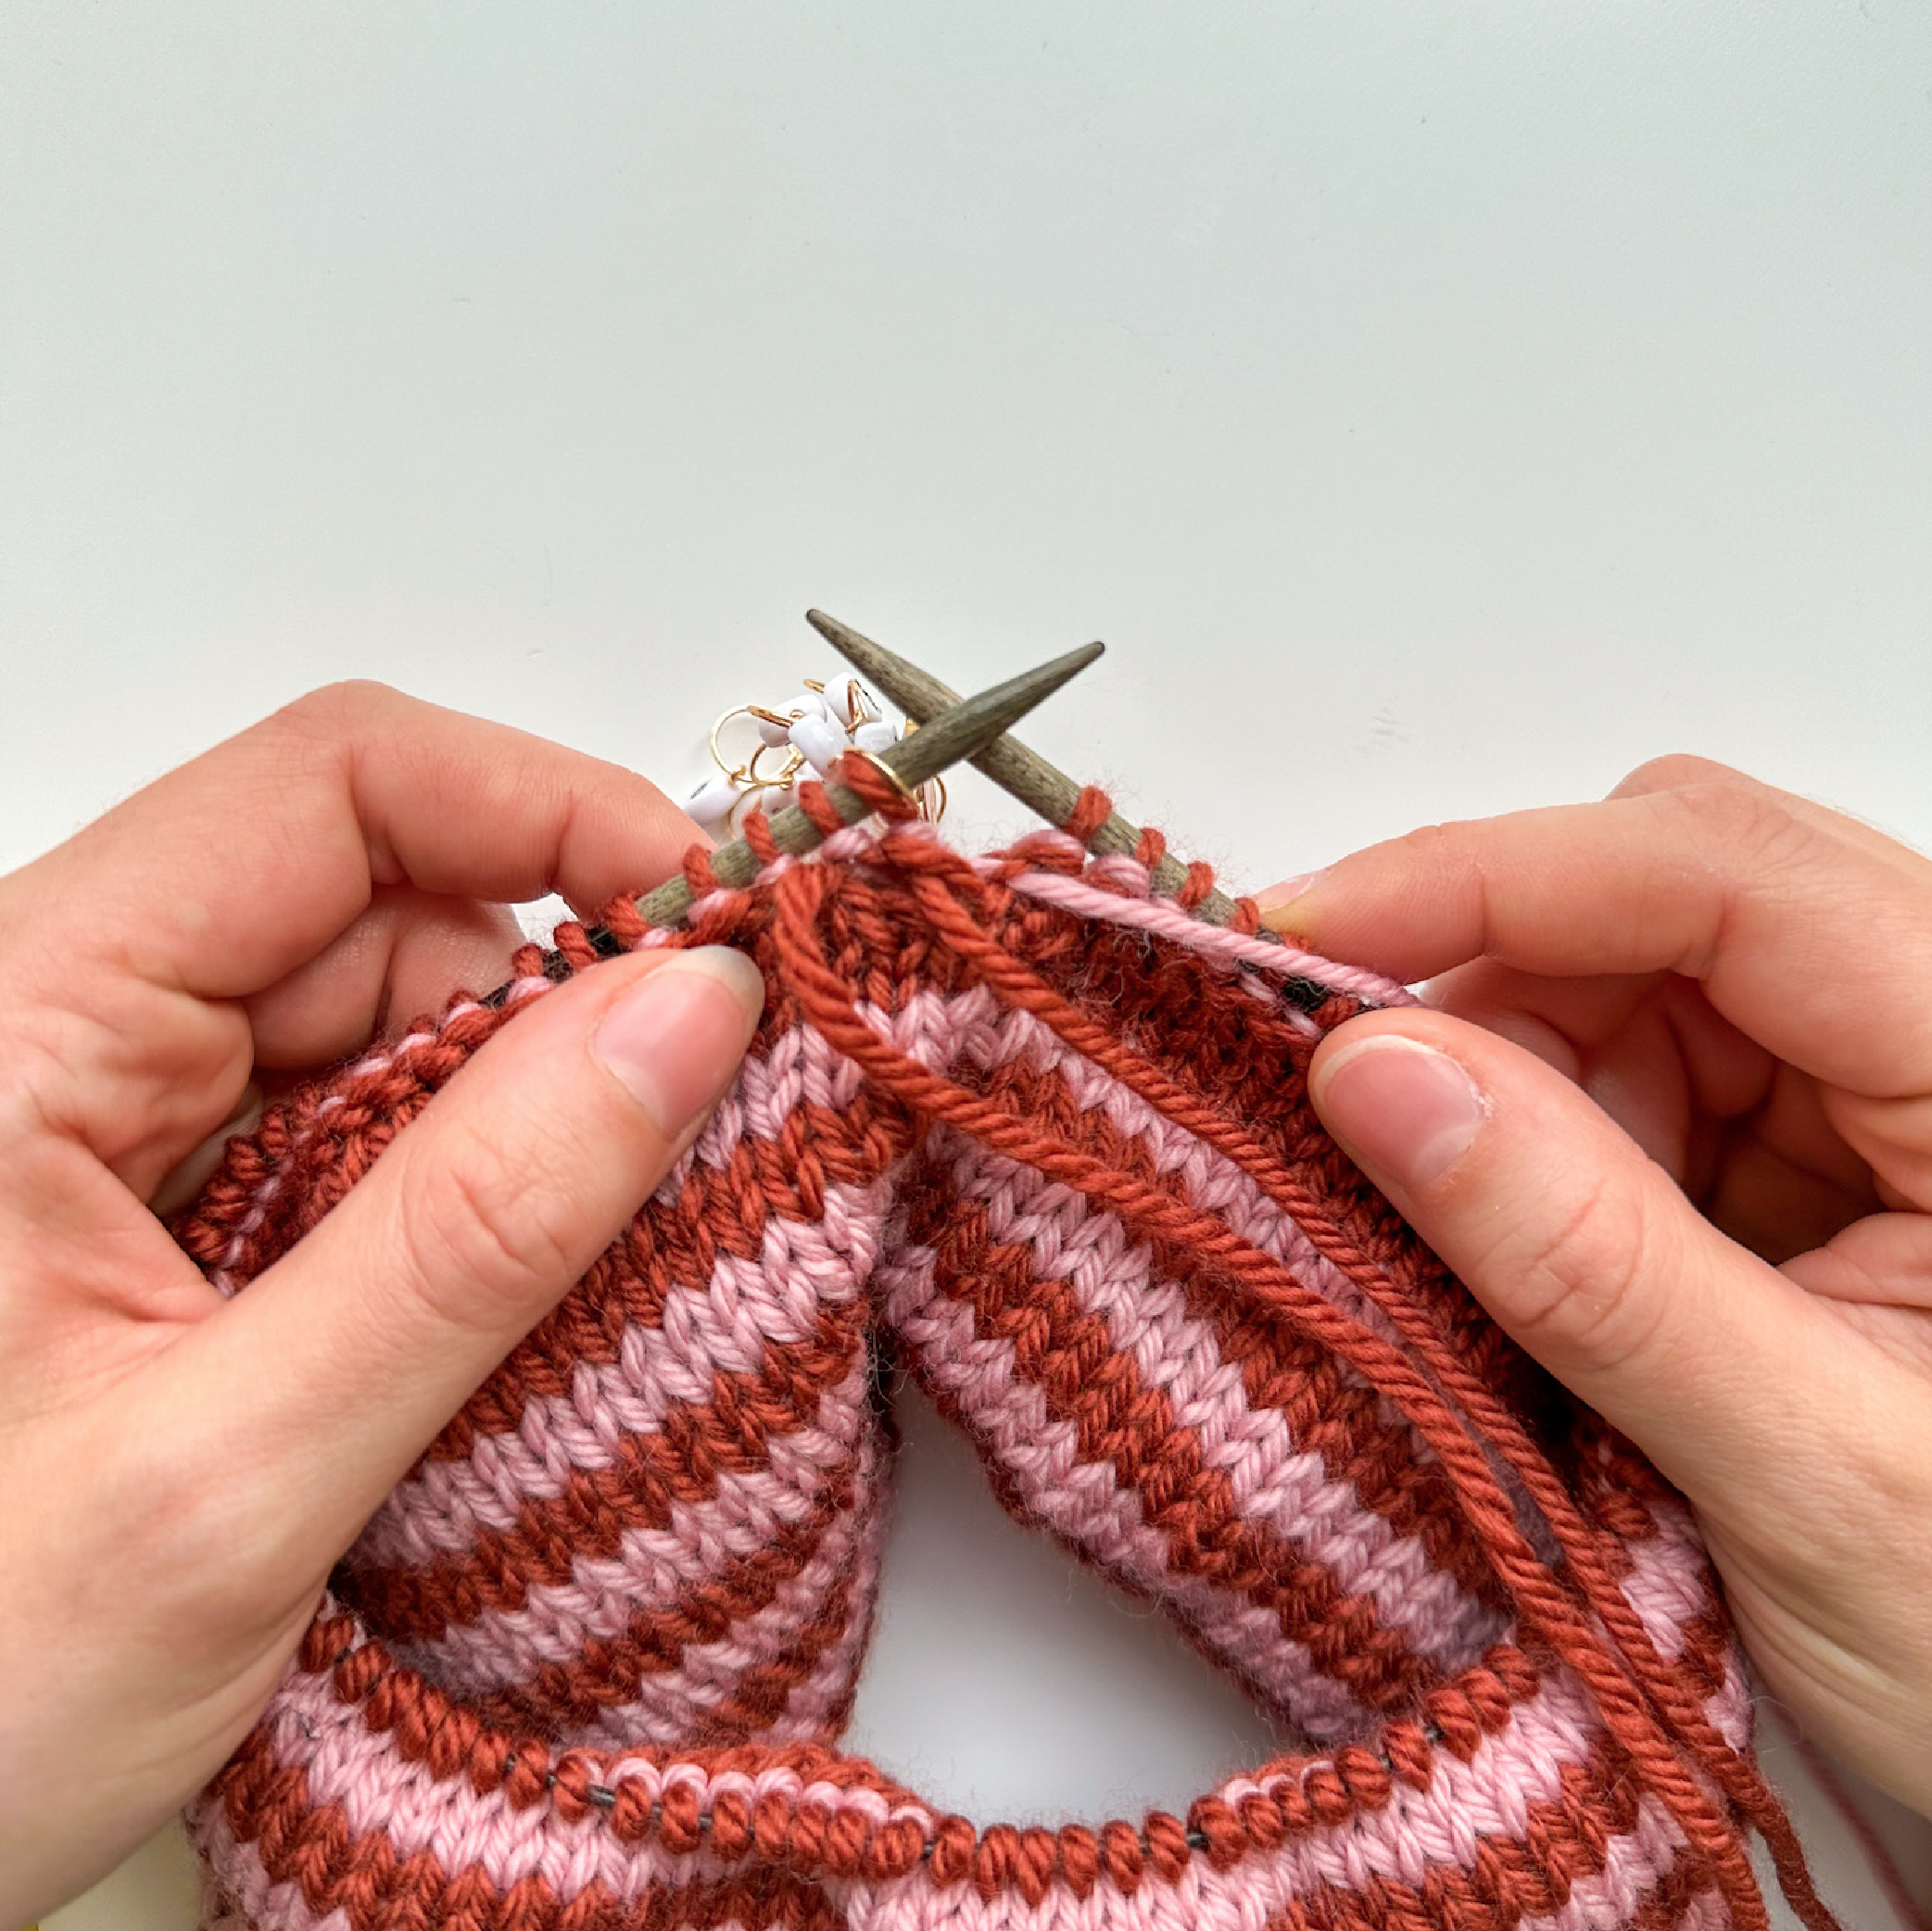 How to knit garter stitch in the round - step by step instructions